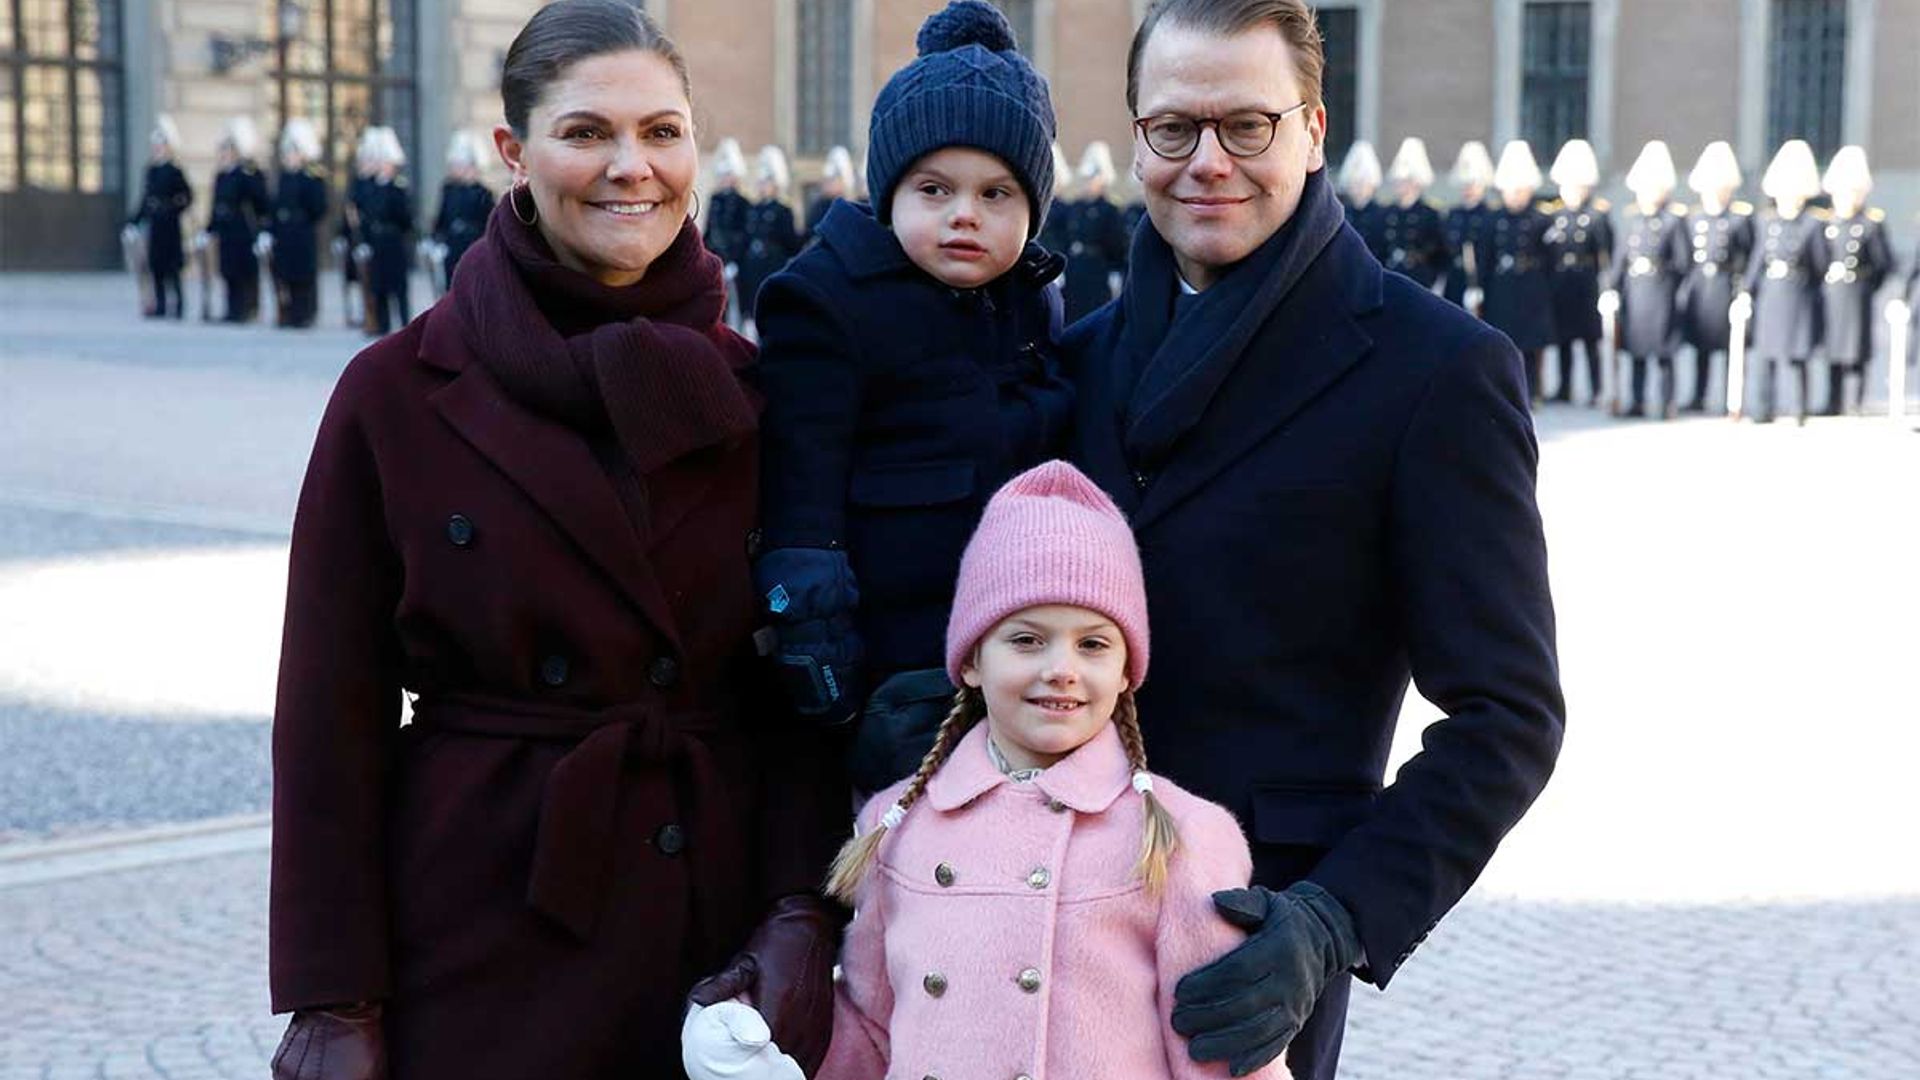 Crown Princess Victoria releases new photos of her family to encourage people to wash their hands during coronavirus crisis